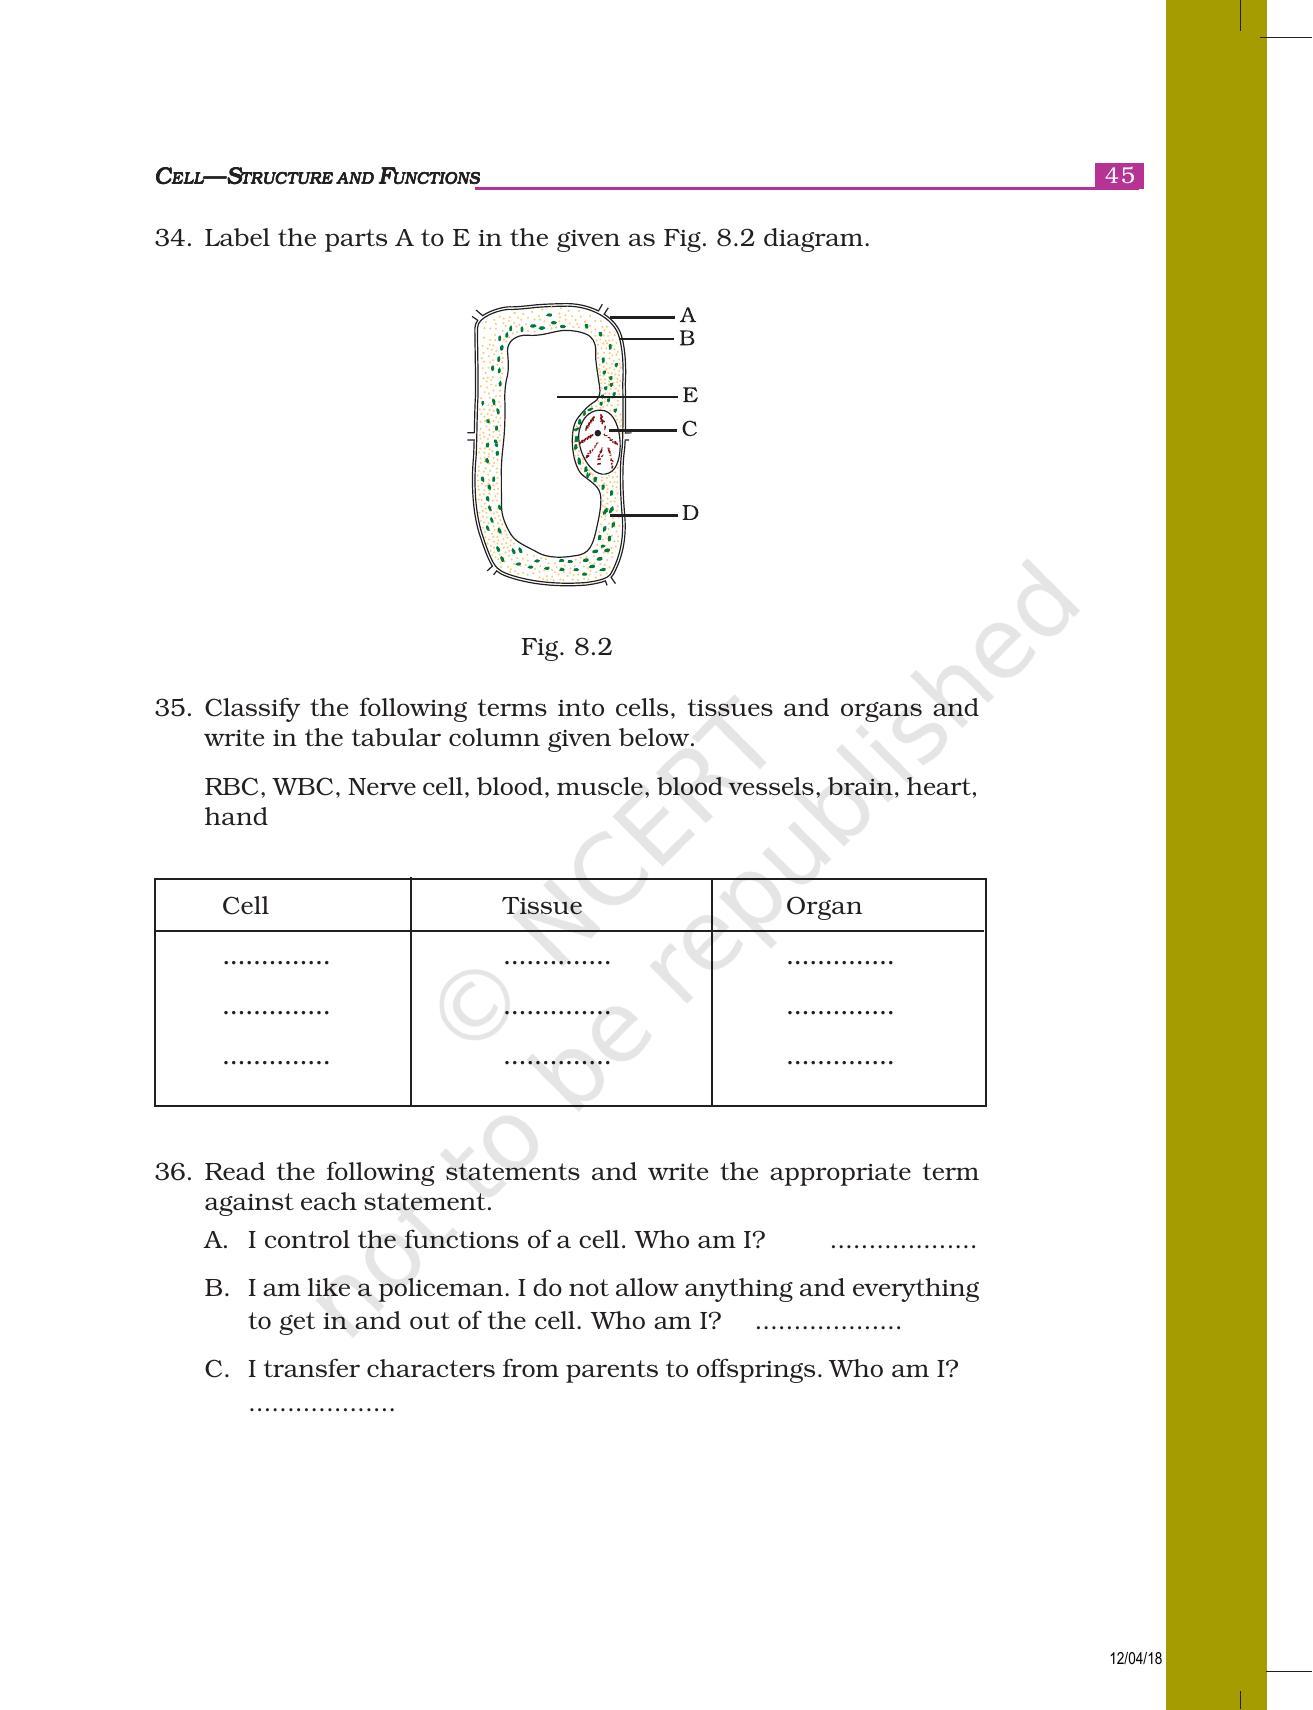 NCERT Exemplar Book for Class 8 Science: Chapter 8- Cell—Structure and Functions - Page 6